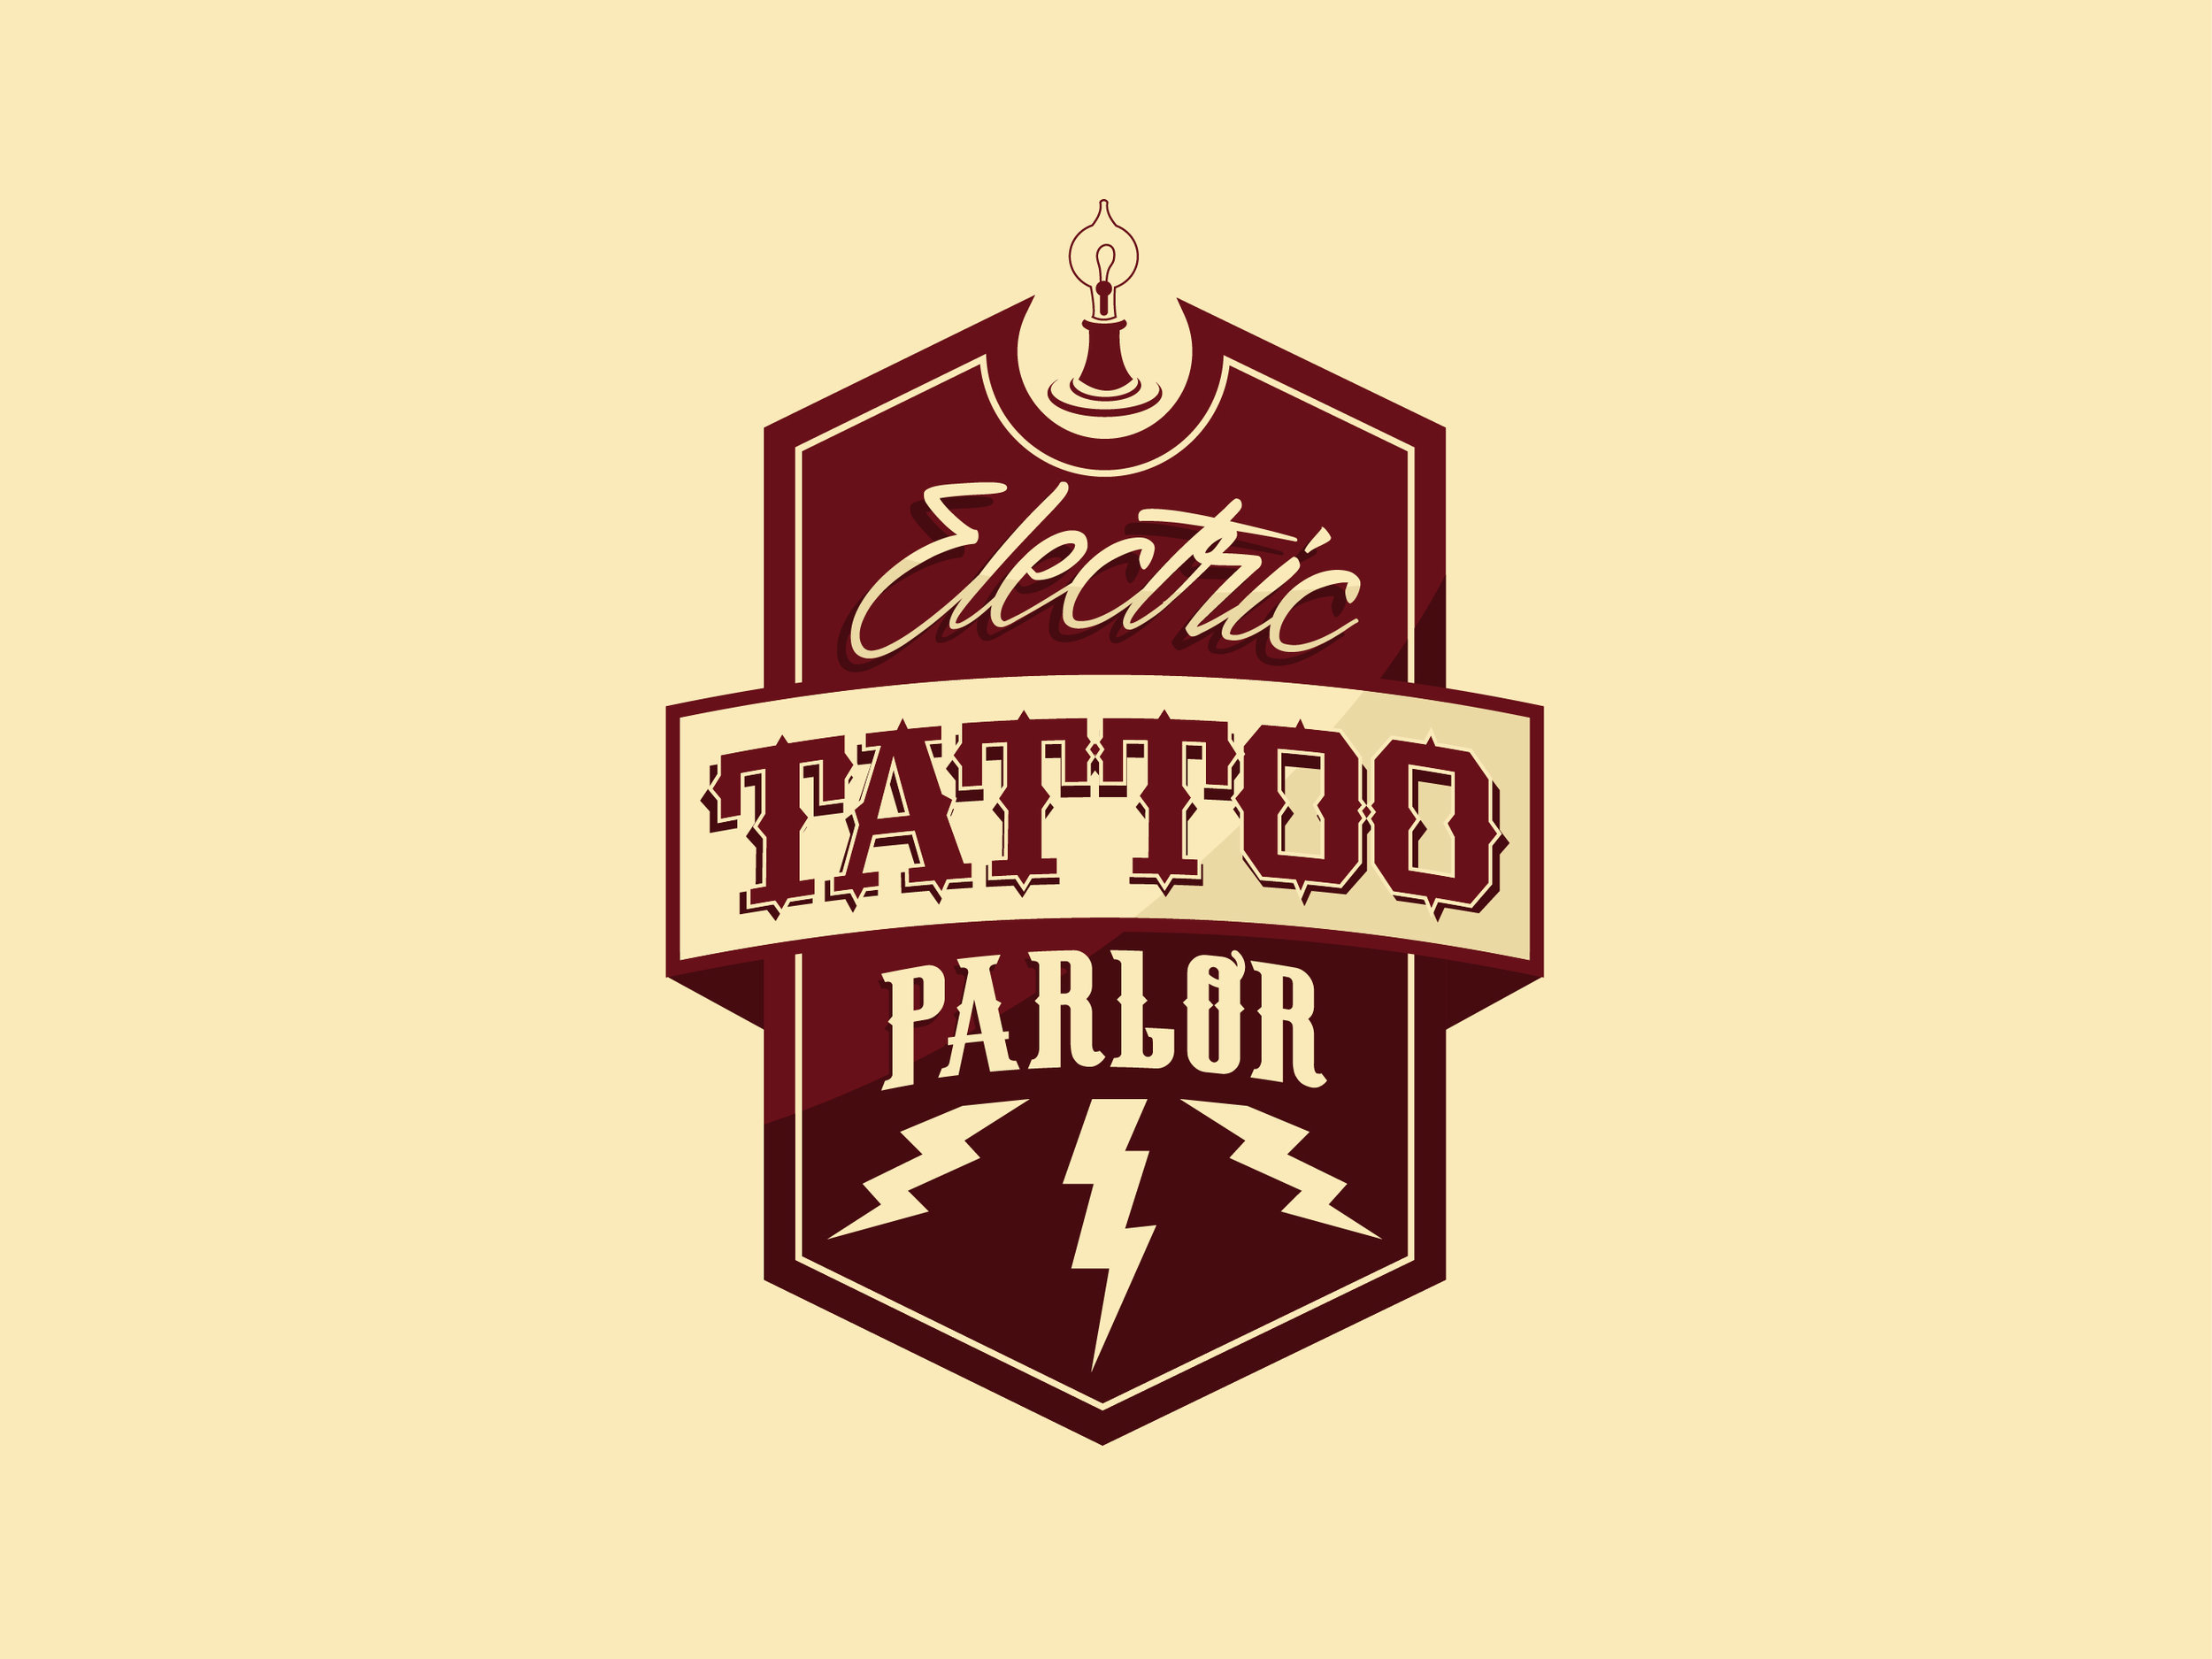 Electric Tattoo Parlor